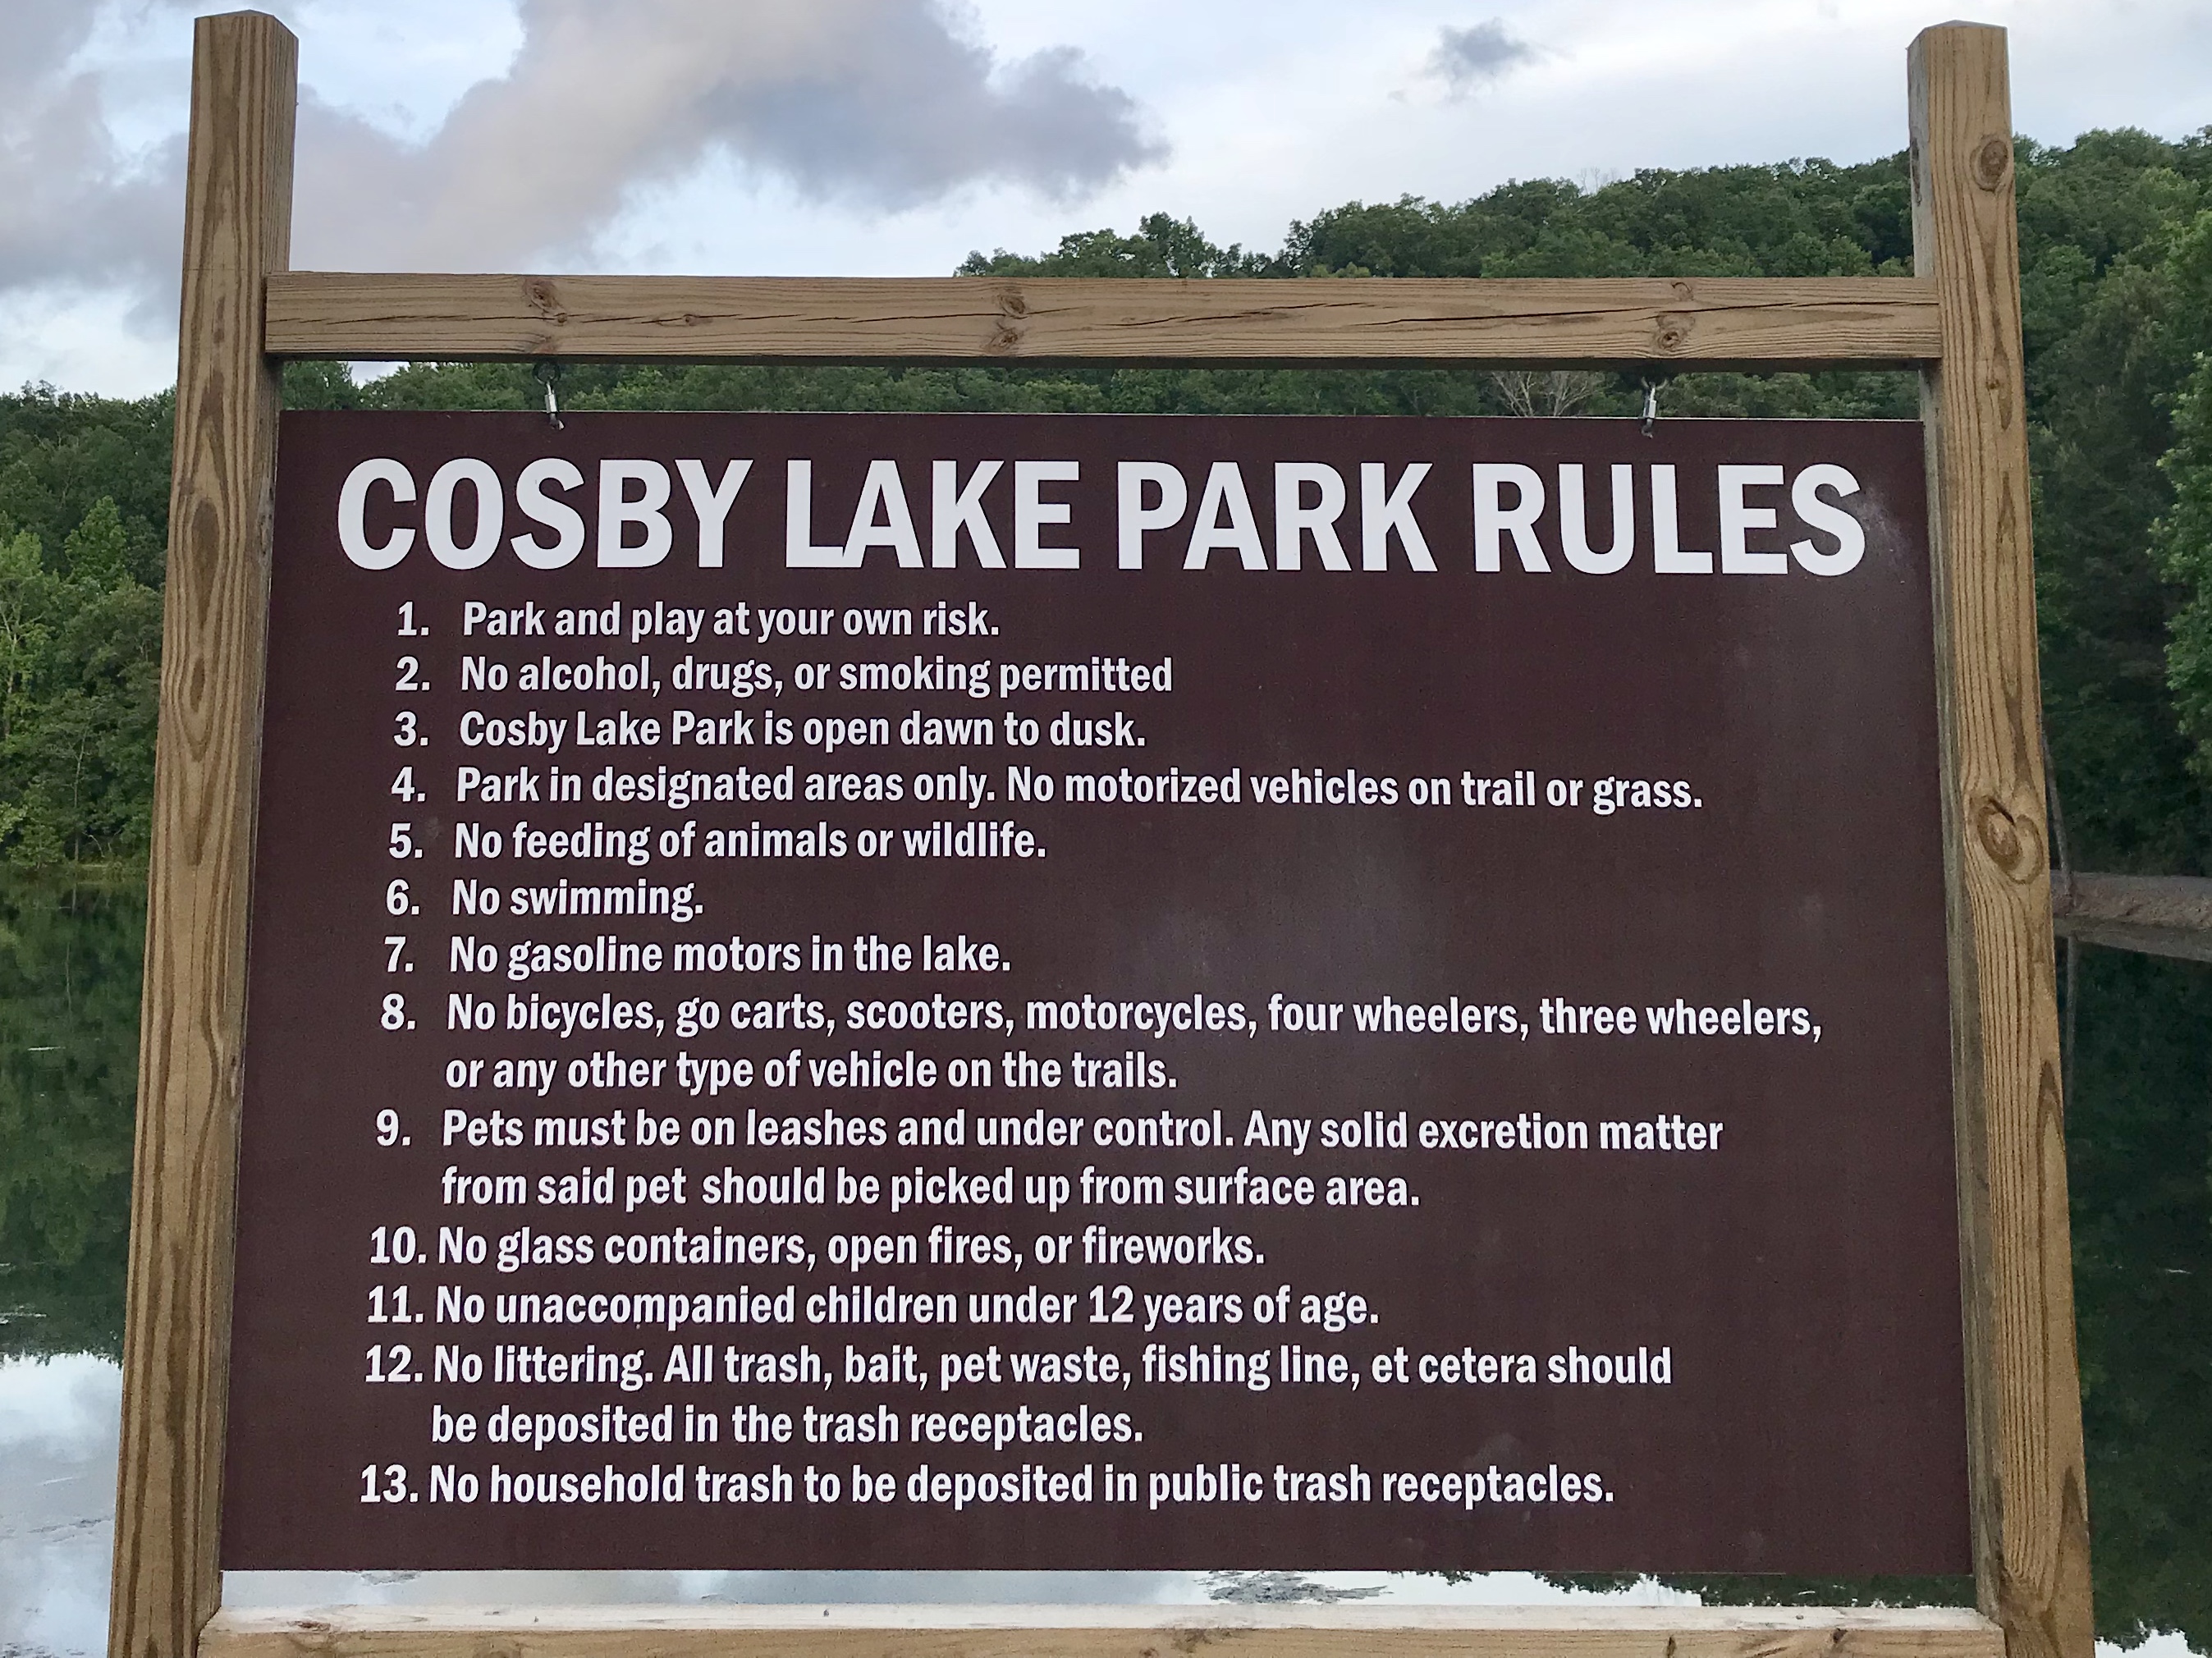 Clay Council raises fines for Cosby Lake violations